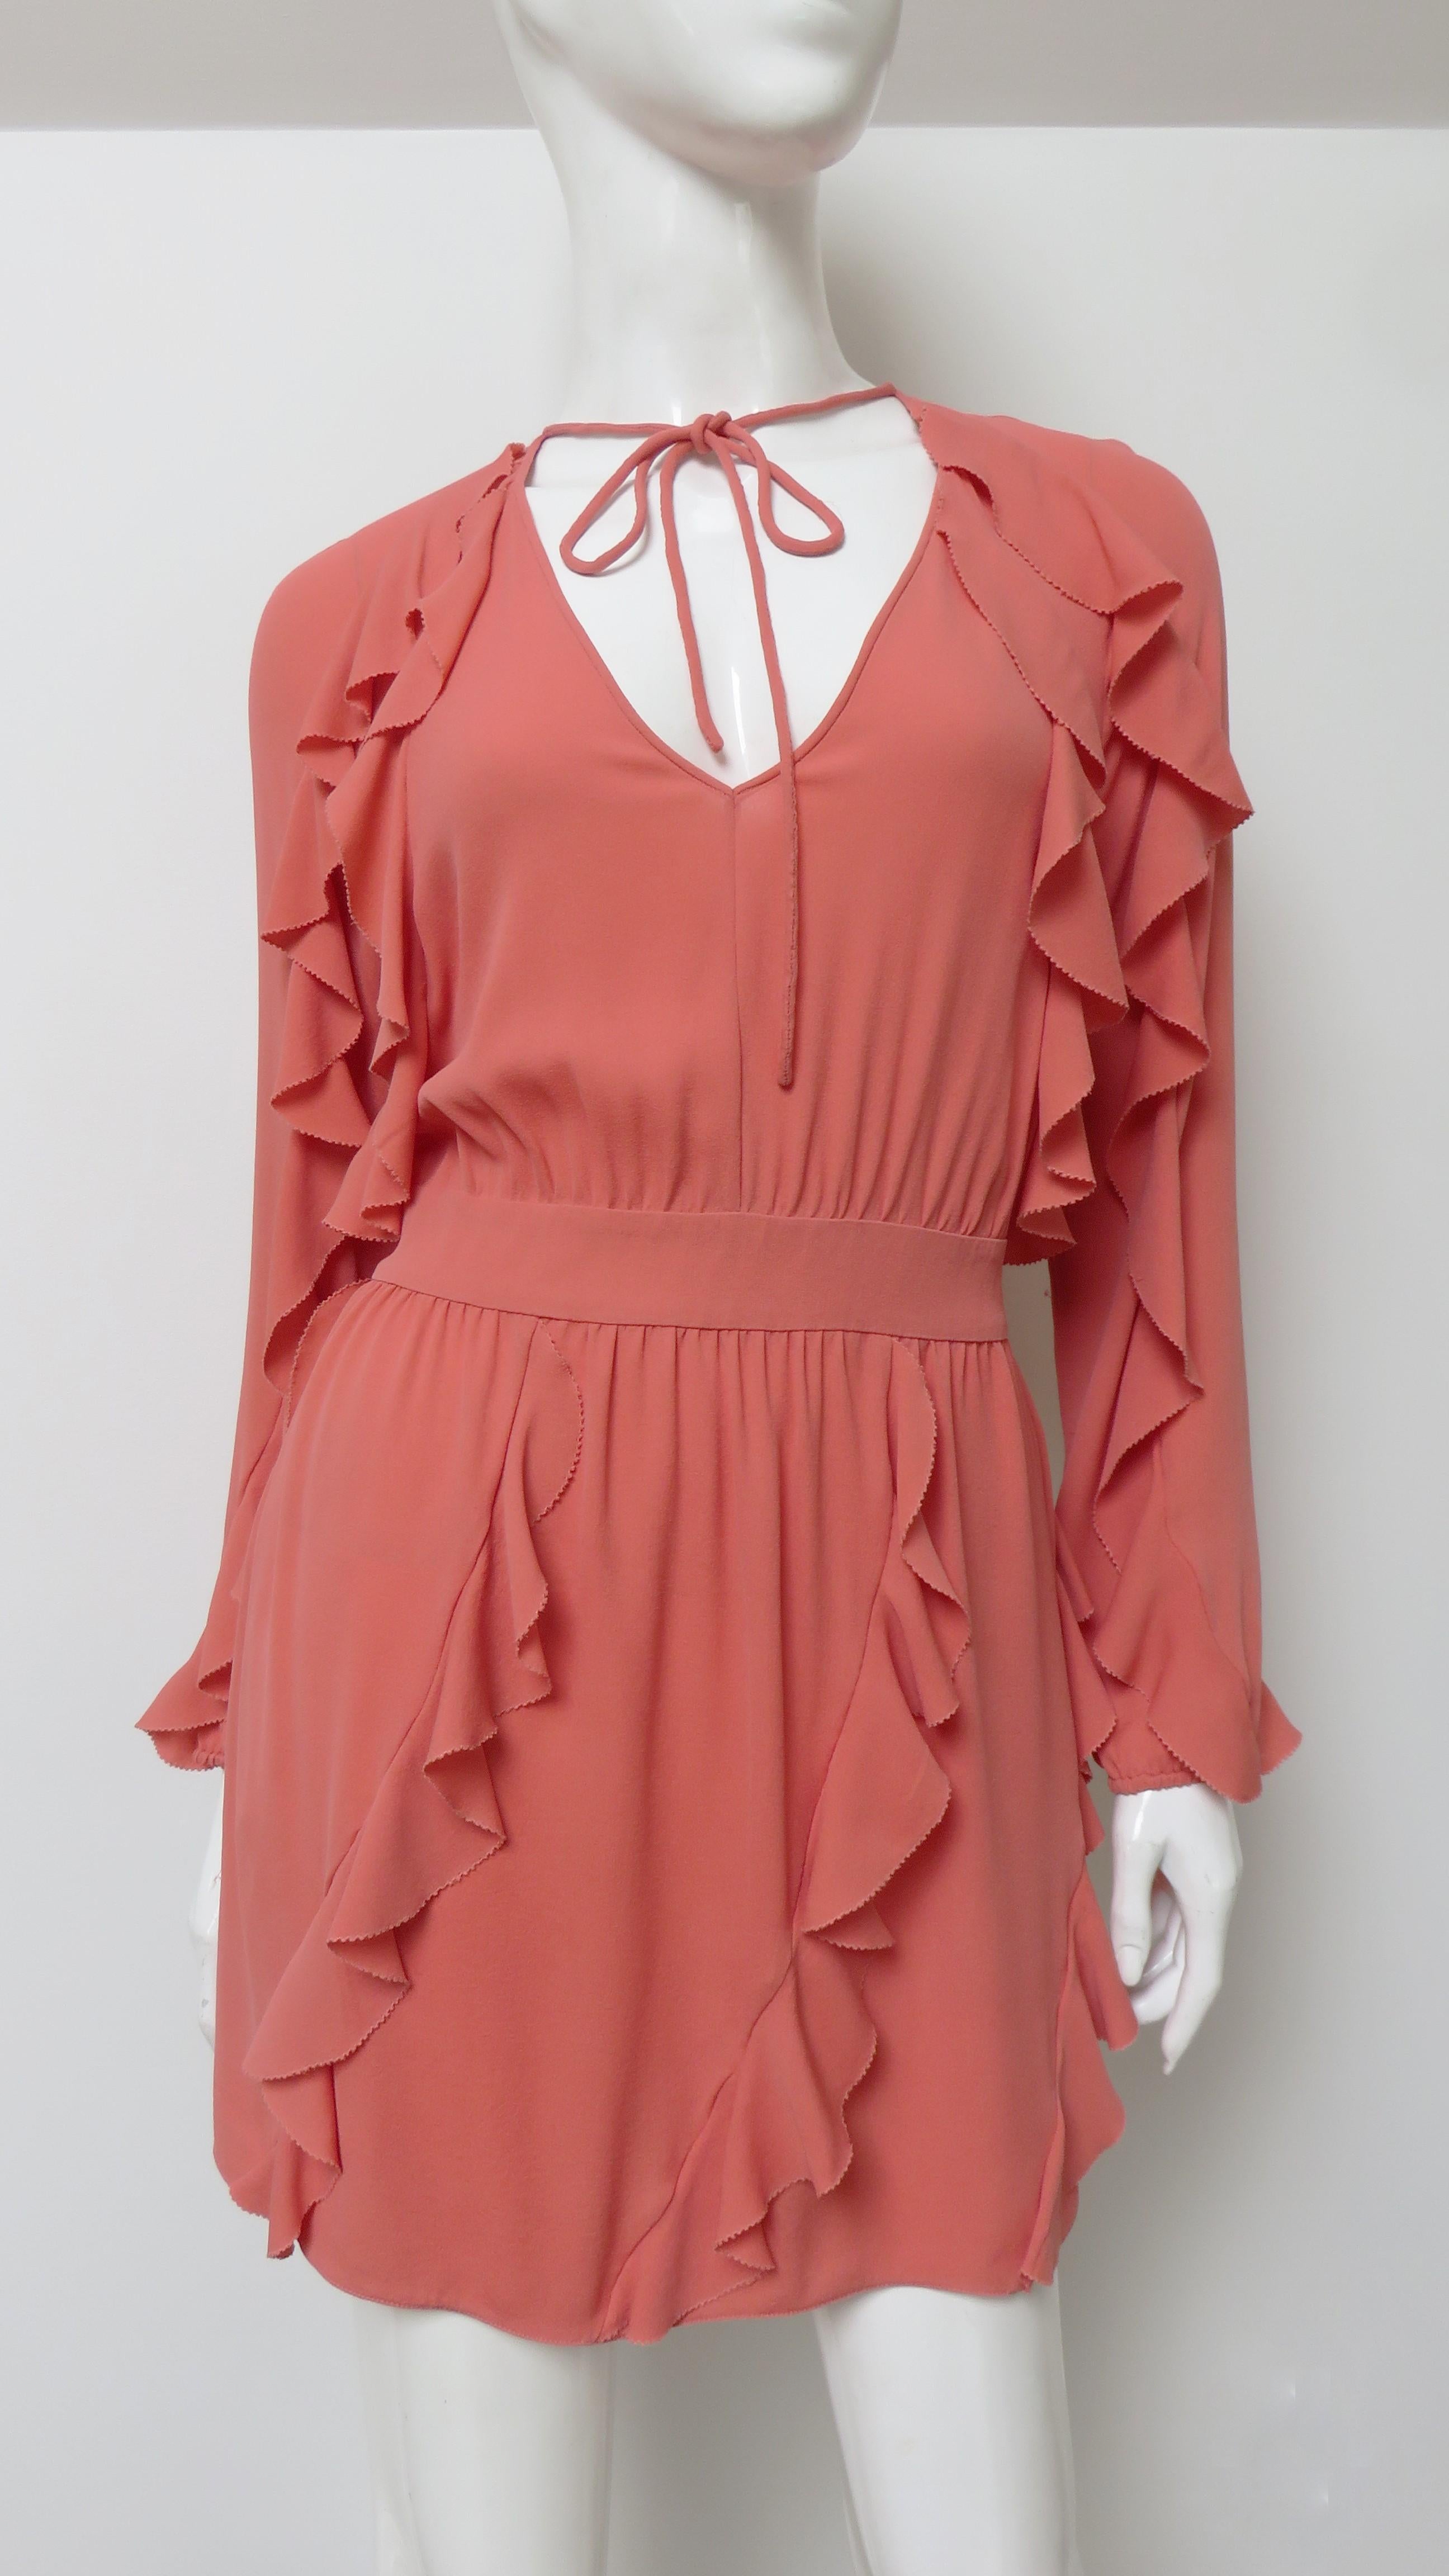 A gorgeous coral colored silk dress from Valentino.  It has a V neckline with an optional tie at the neck and long sleeves that gather at the wrists.  A band separates the bodice from the skirt portion which in addition to the sleeves have vertical